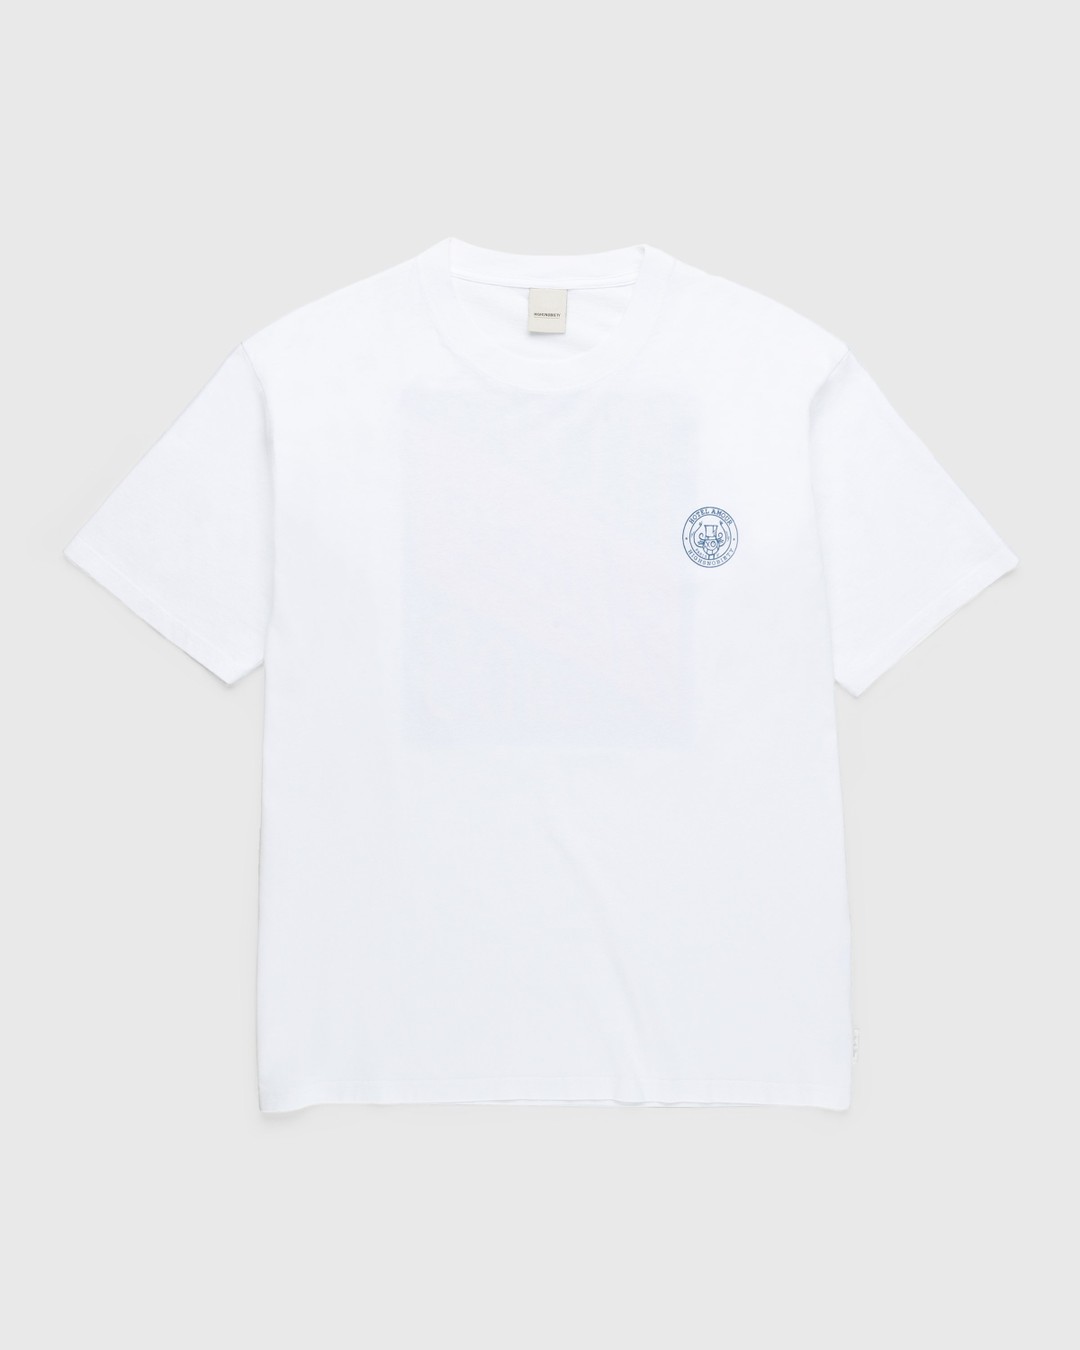 Hotel Amour x Highsnobiety – Not In Paris 4 T-Shirt White - Tops - White - Image 2